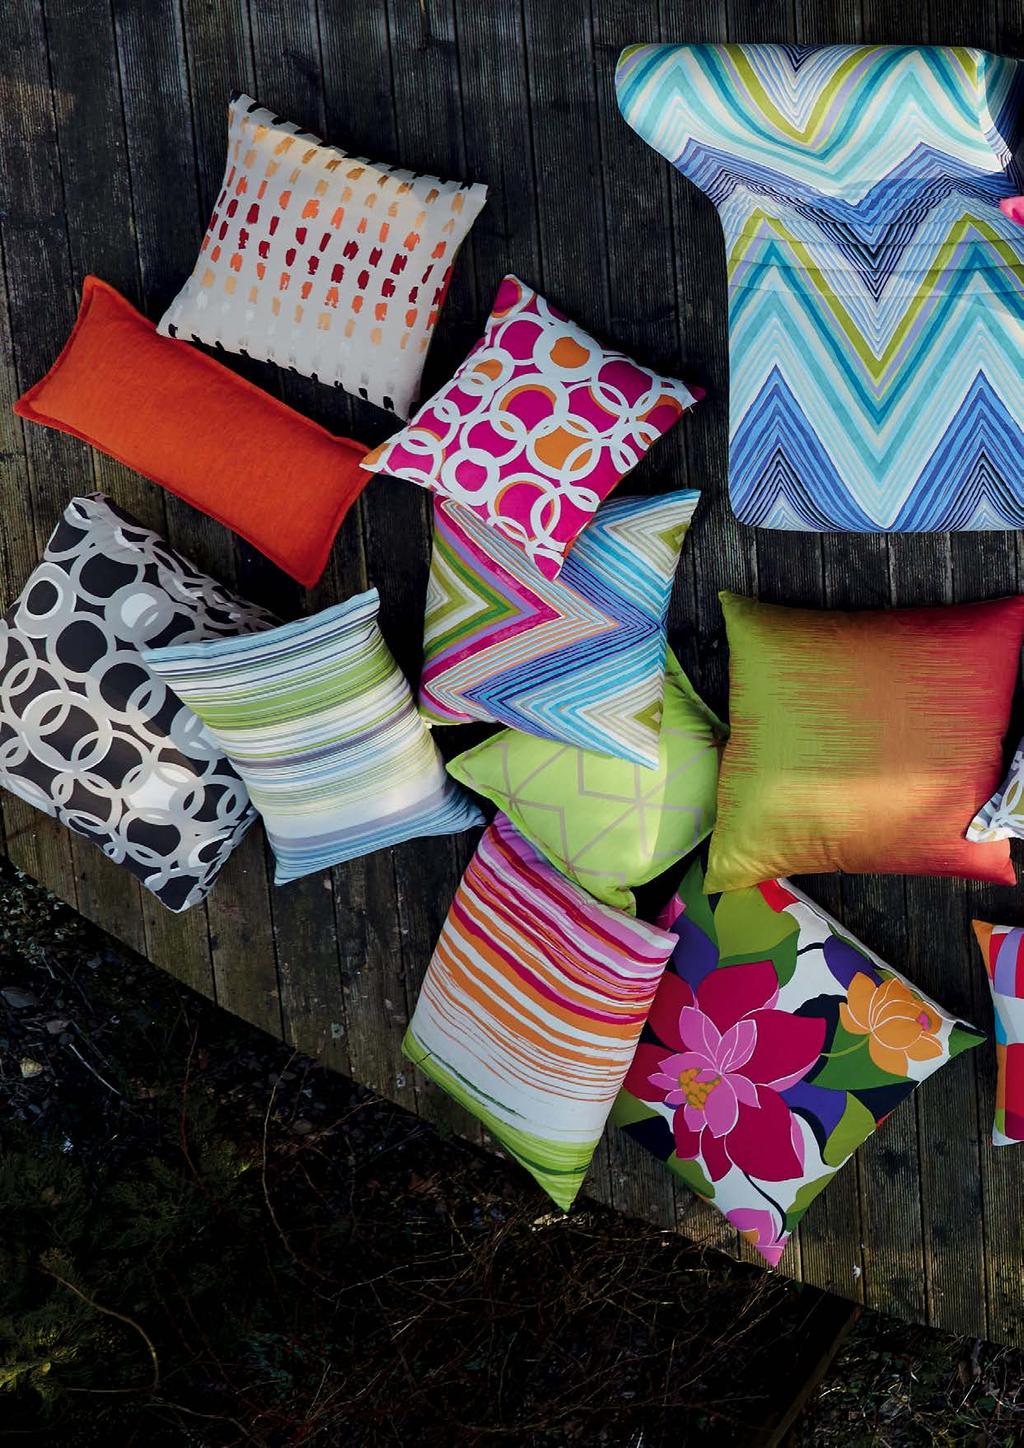 SPIRIT, SOUL & RHYTHM WEAVES A RIOT OF UPLIFTING PATTERN AND VIBRANT COLOUR FROM SCION Scion has produced two very diverse, trend inspired collections: Spirit - modern tribal designs with an organic,